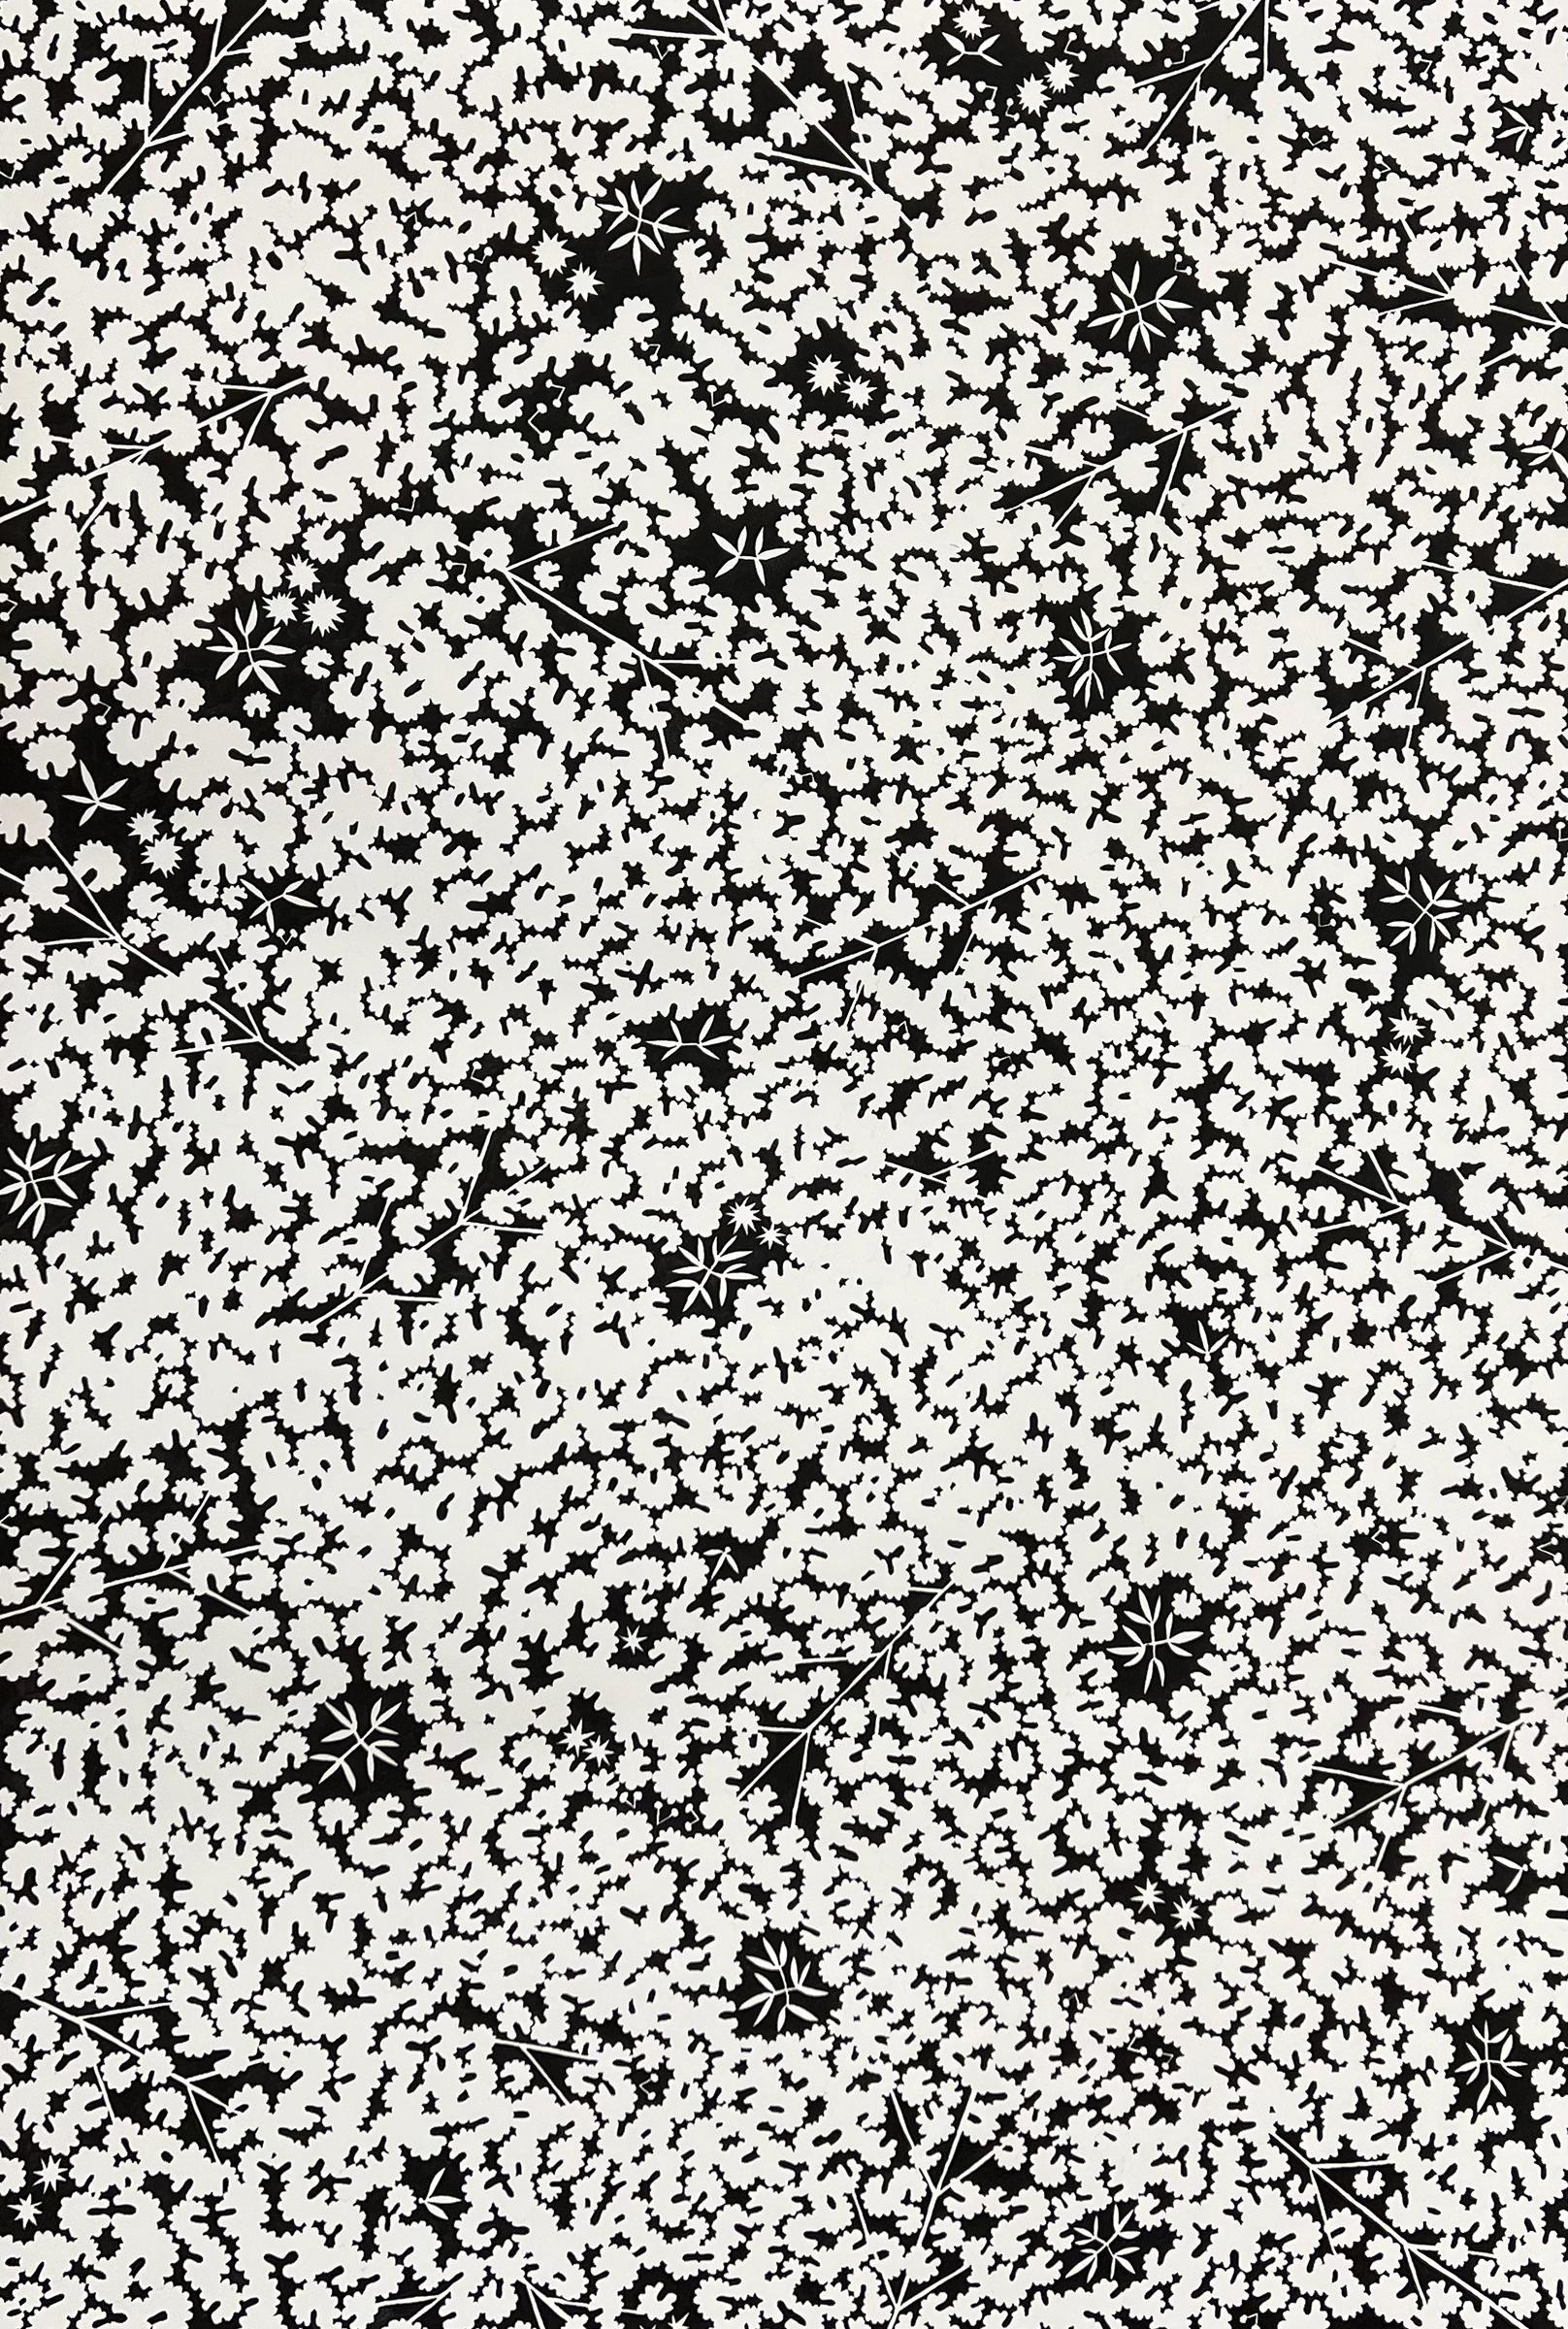 Susan Hable Abstract Painting - "Groundcover No. 4" - black & white ink drawing - botanical